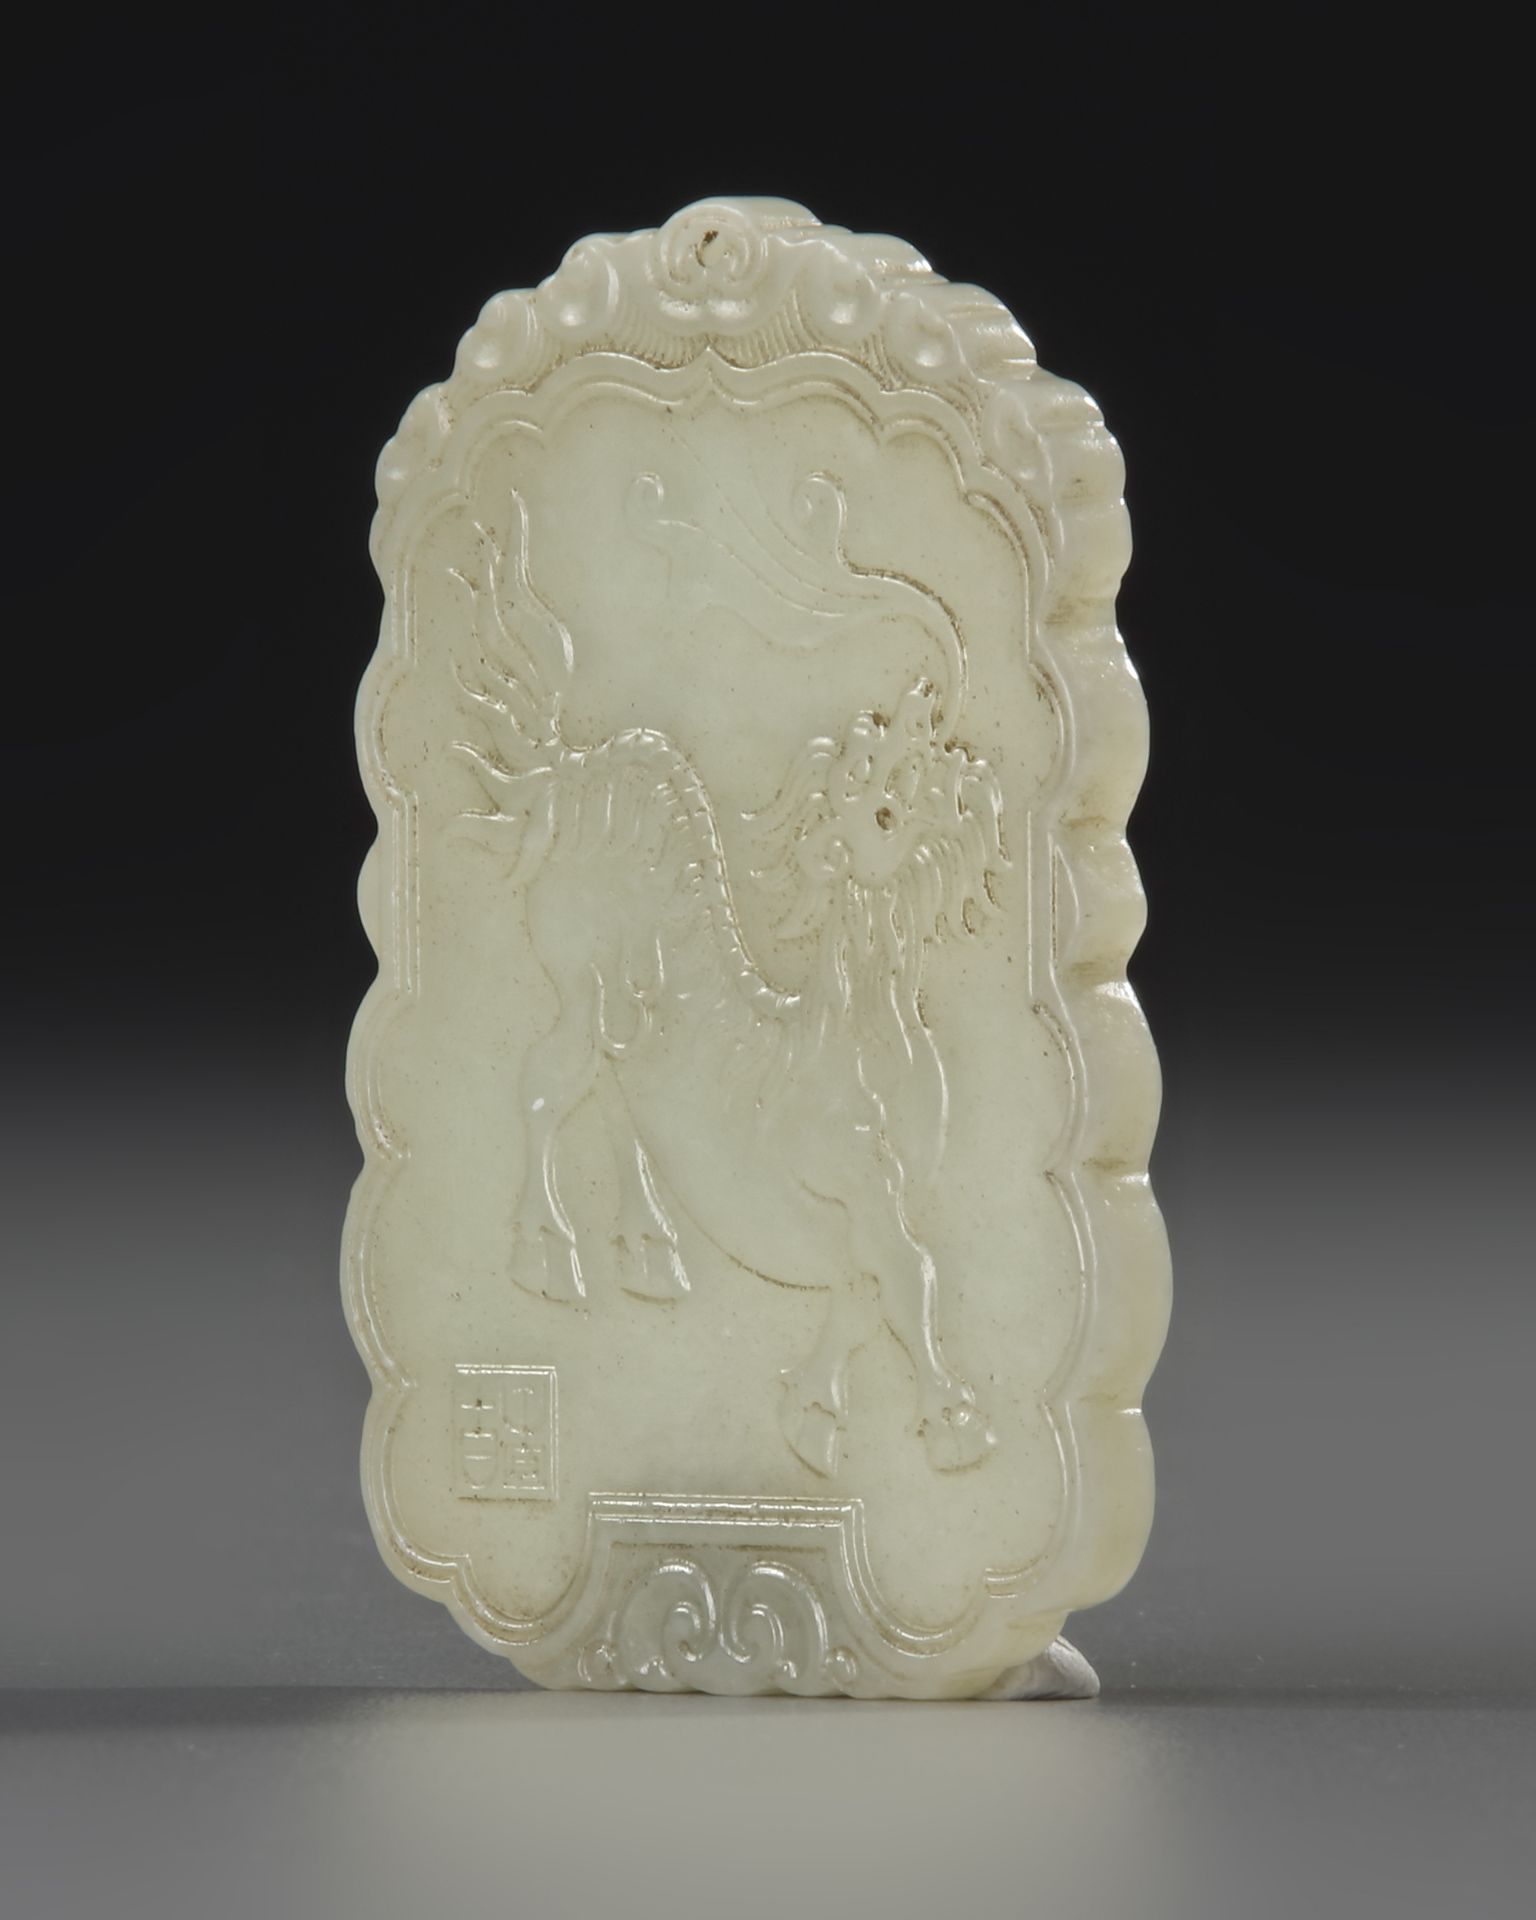 A CHINESE JADE CARVED PLAQUE, QING DYNASTY (1644-1911) - Image 4 of 4